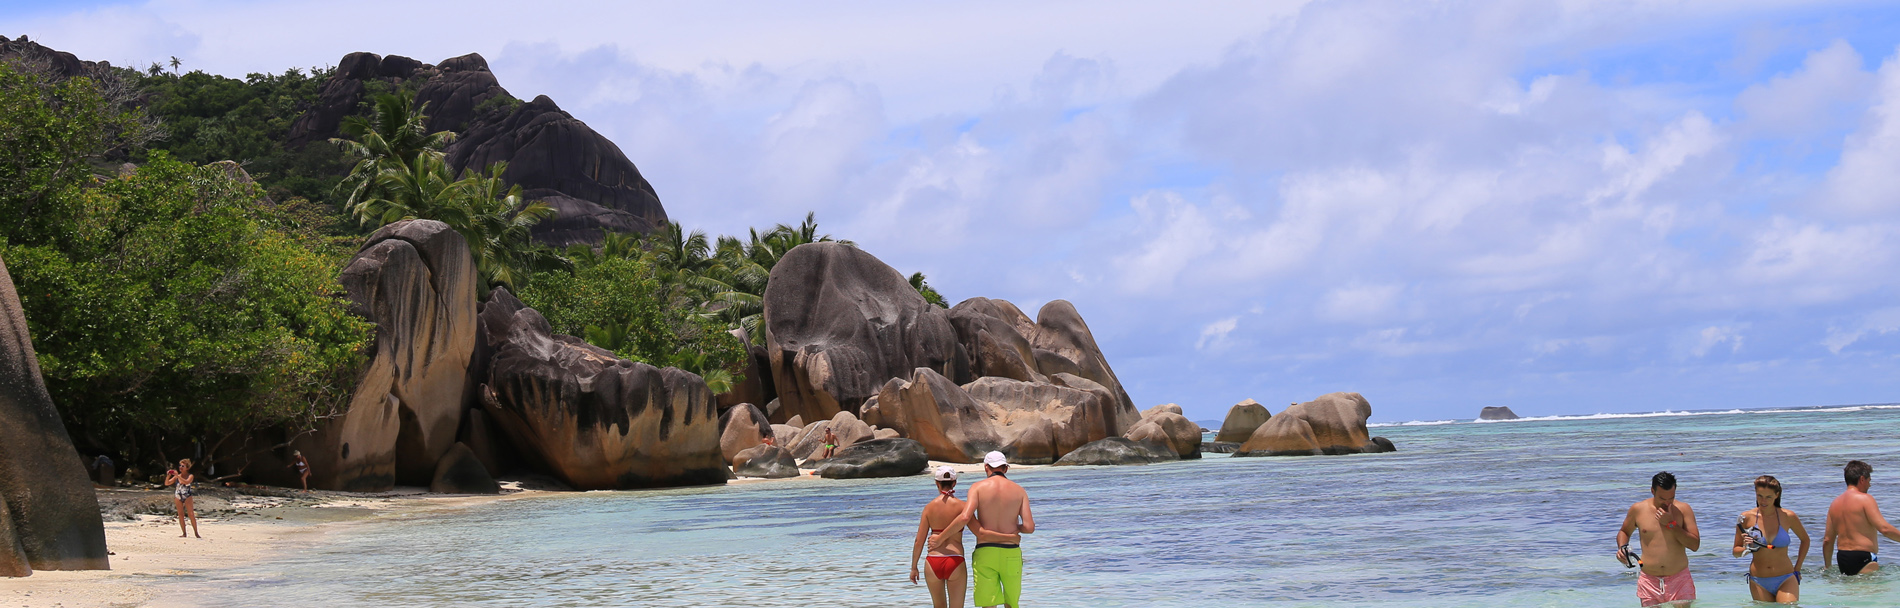 Seychelles Tour Package - 6 Nights